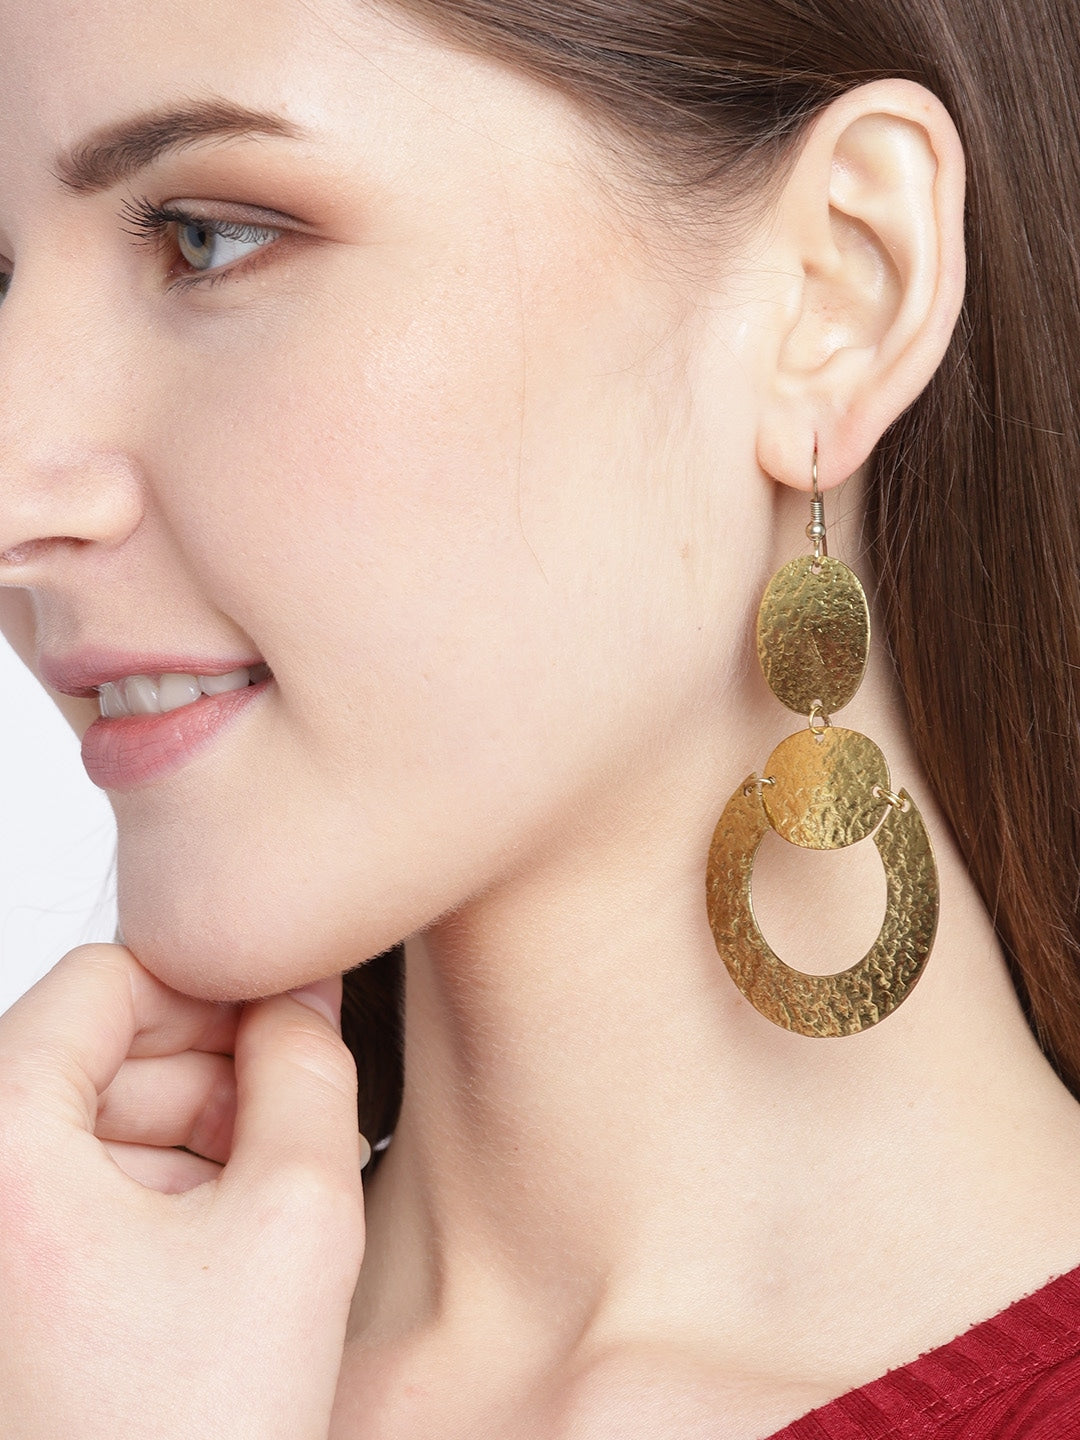 Gold-Plated Textured Geometric Drop Earrings